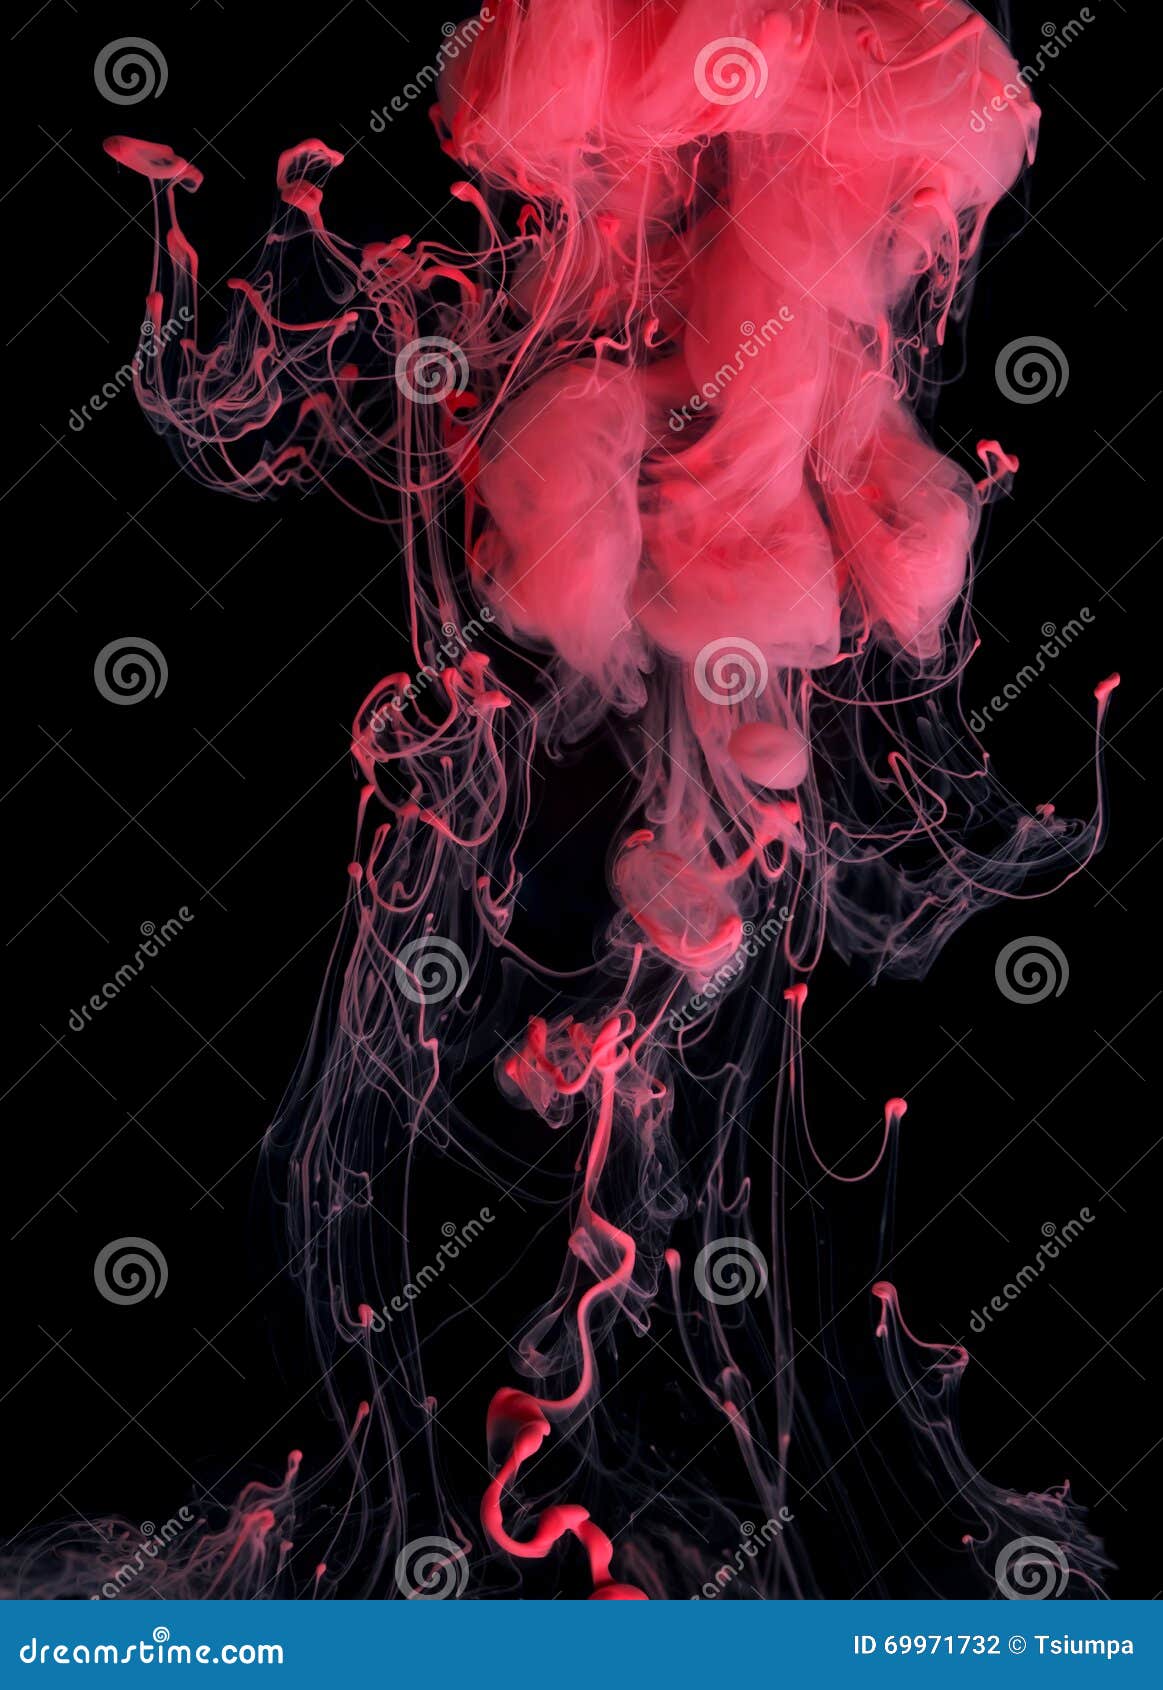 Red dye in water stock image. Image of pattern, paint - 80837473